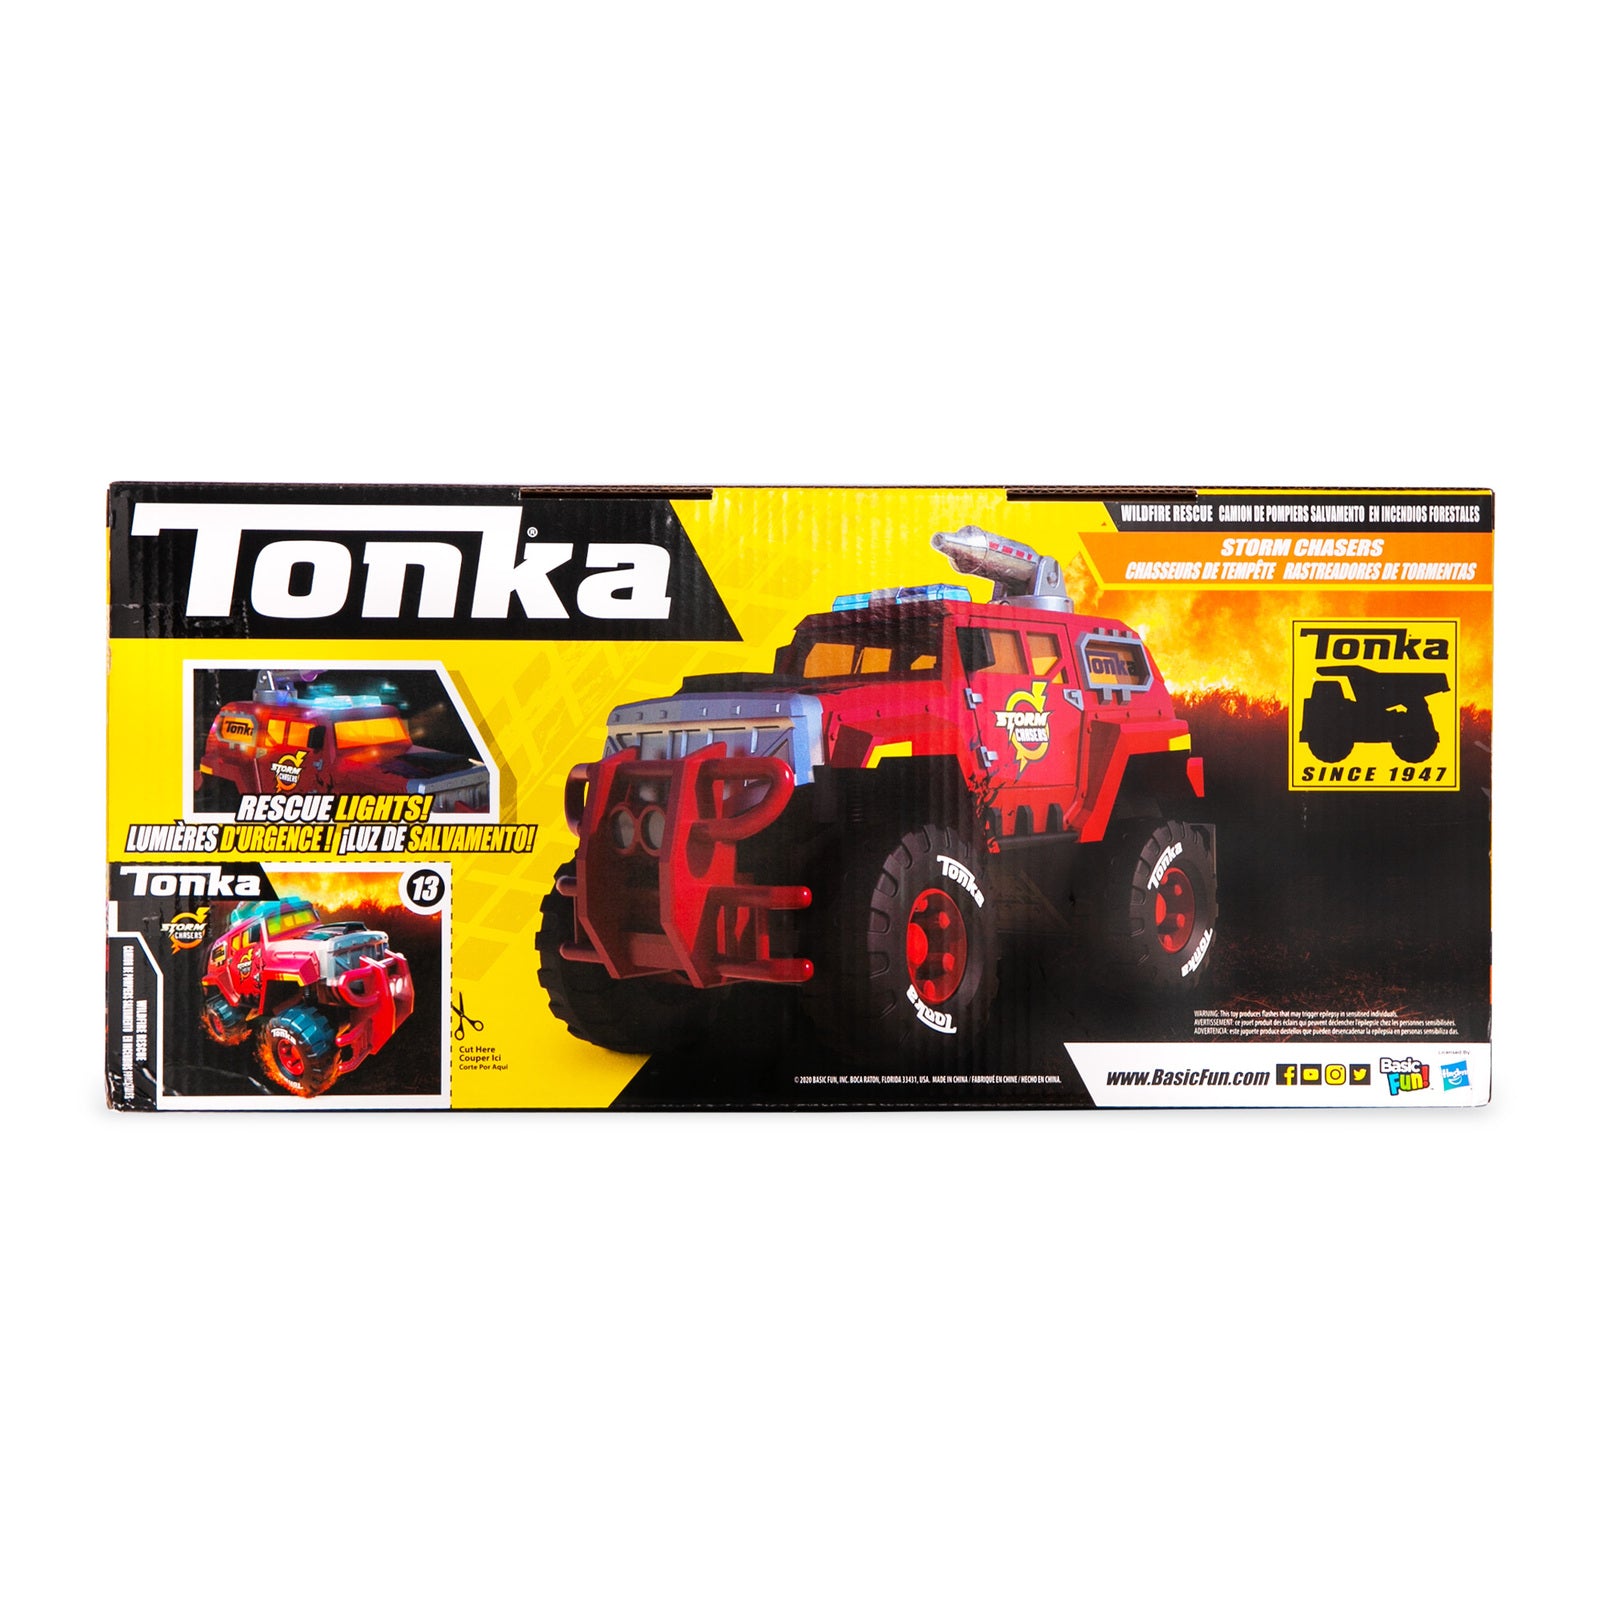 Tonka Storm Chasers - Wildfire Rescue